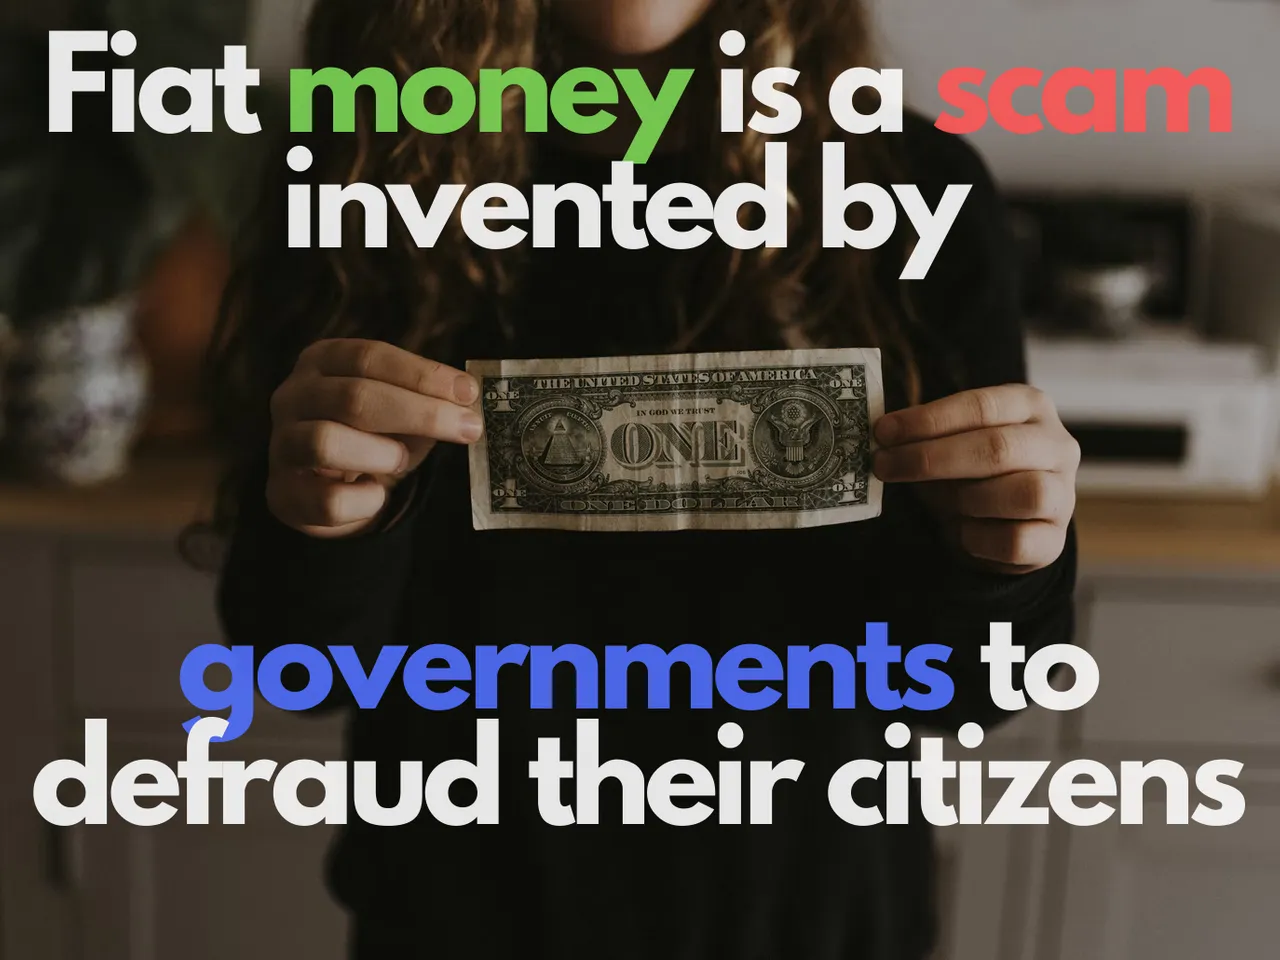 fiat_money_is_a_counterfeiting_invented_by_states_to_defraud_their_citizens..png